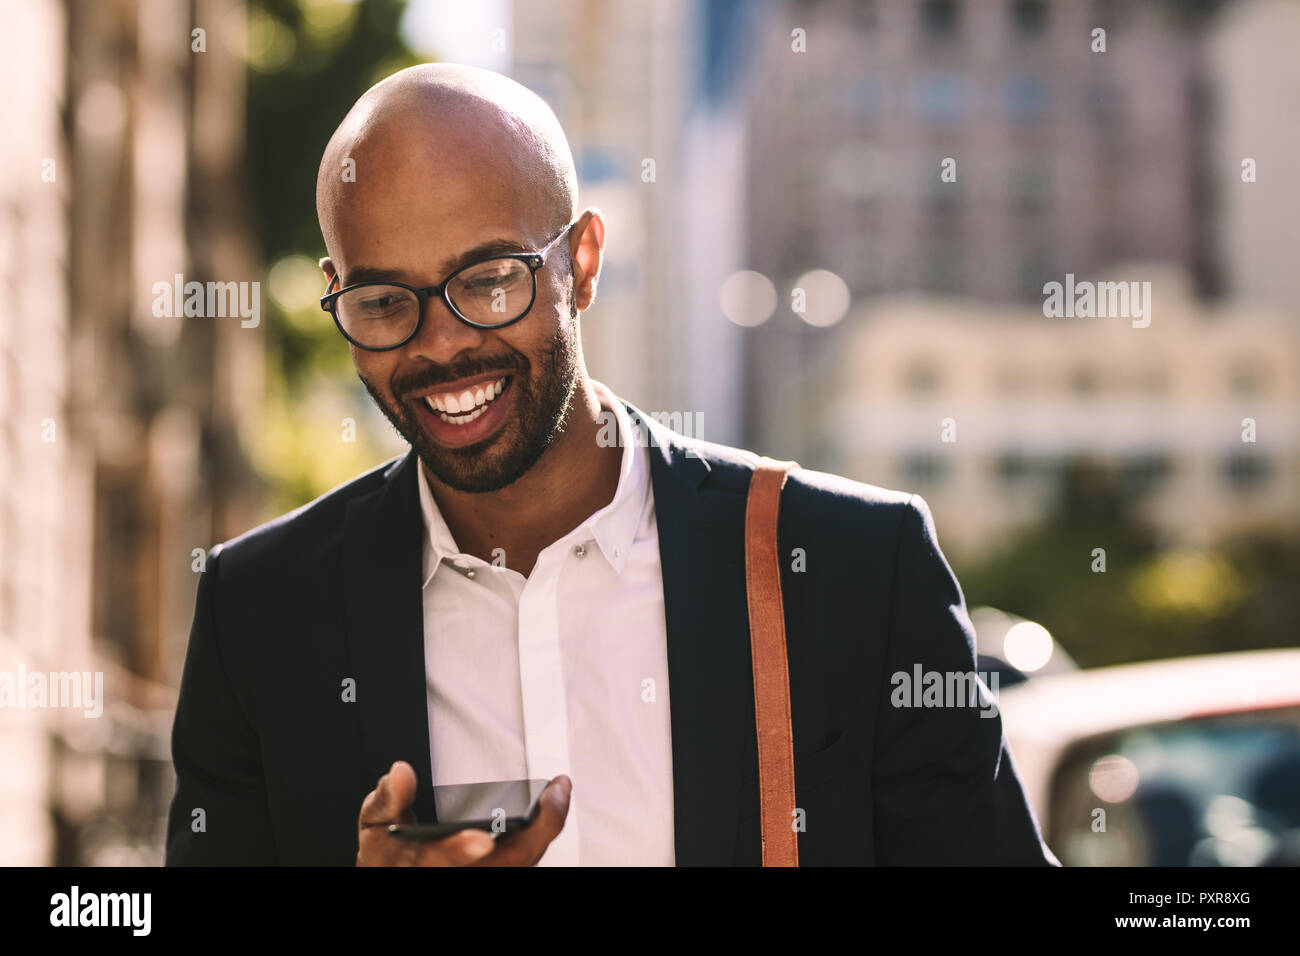 Smiling young african businessman commuting with a mobile phone while walking outdoors. Bald man in suit walking in the city and talking on cell phone Stock Photo